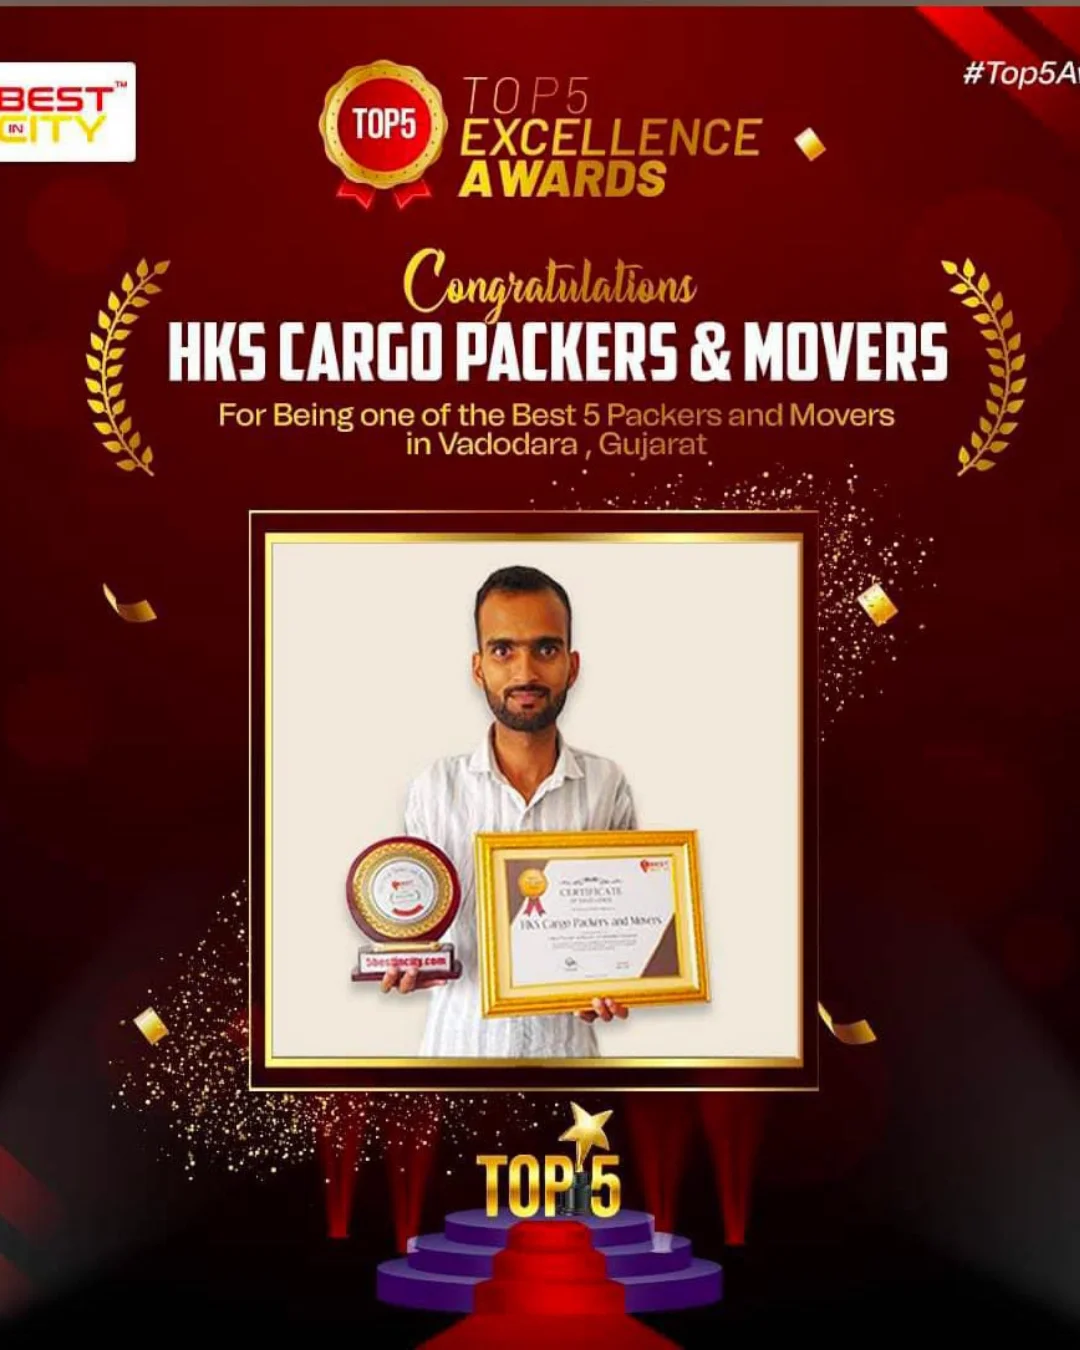 Top 5 Excellence Award - HKS Cargo Packers and Movers